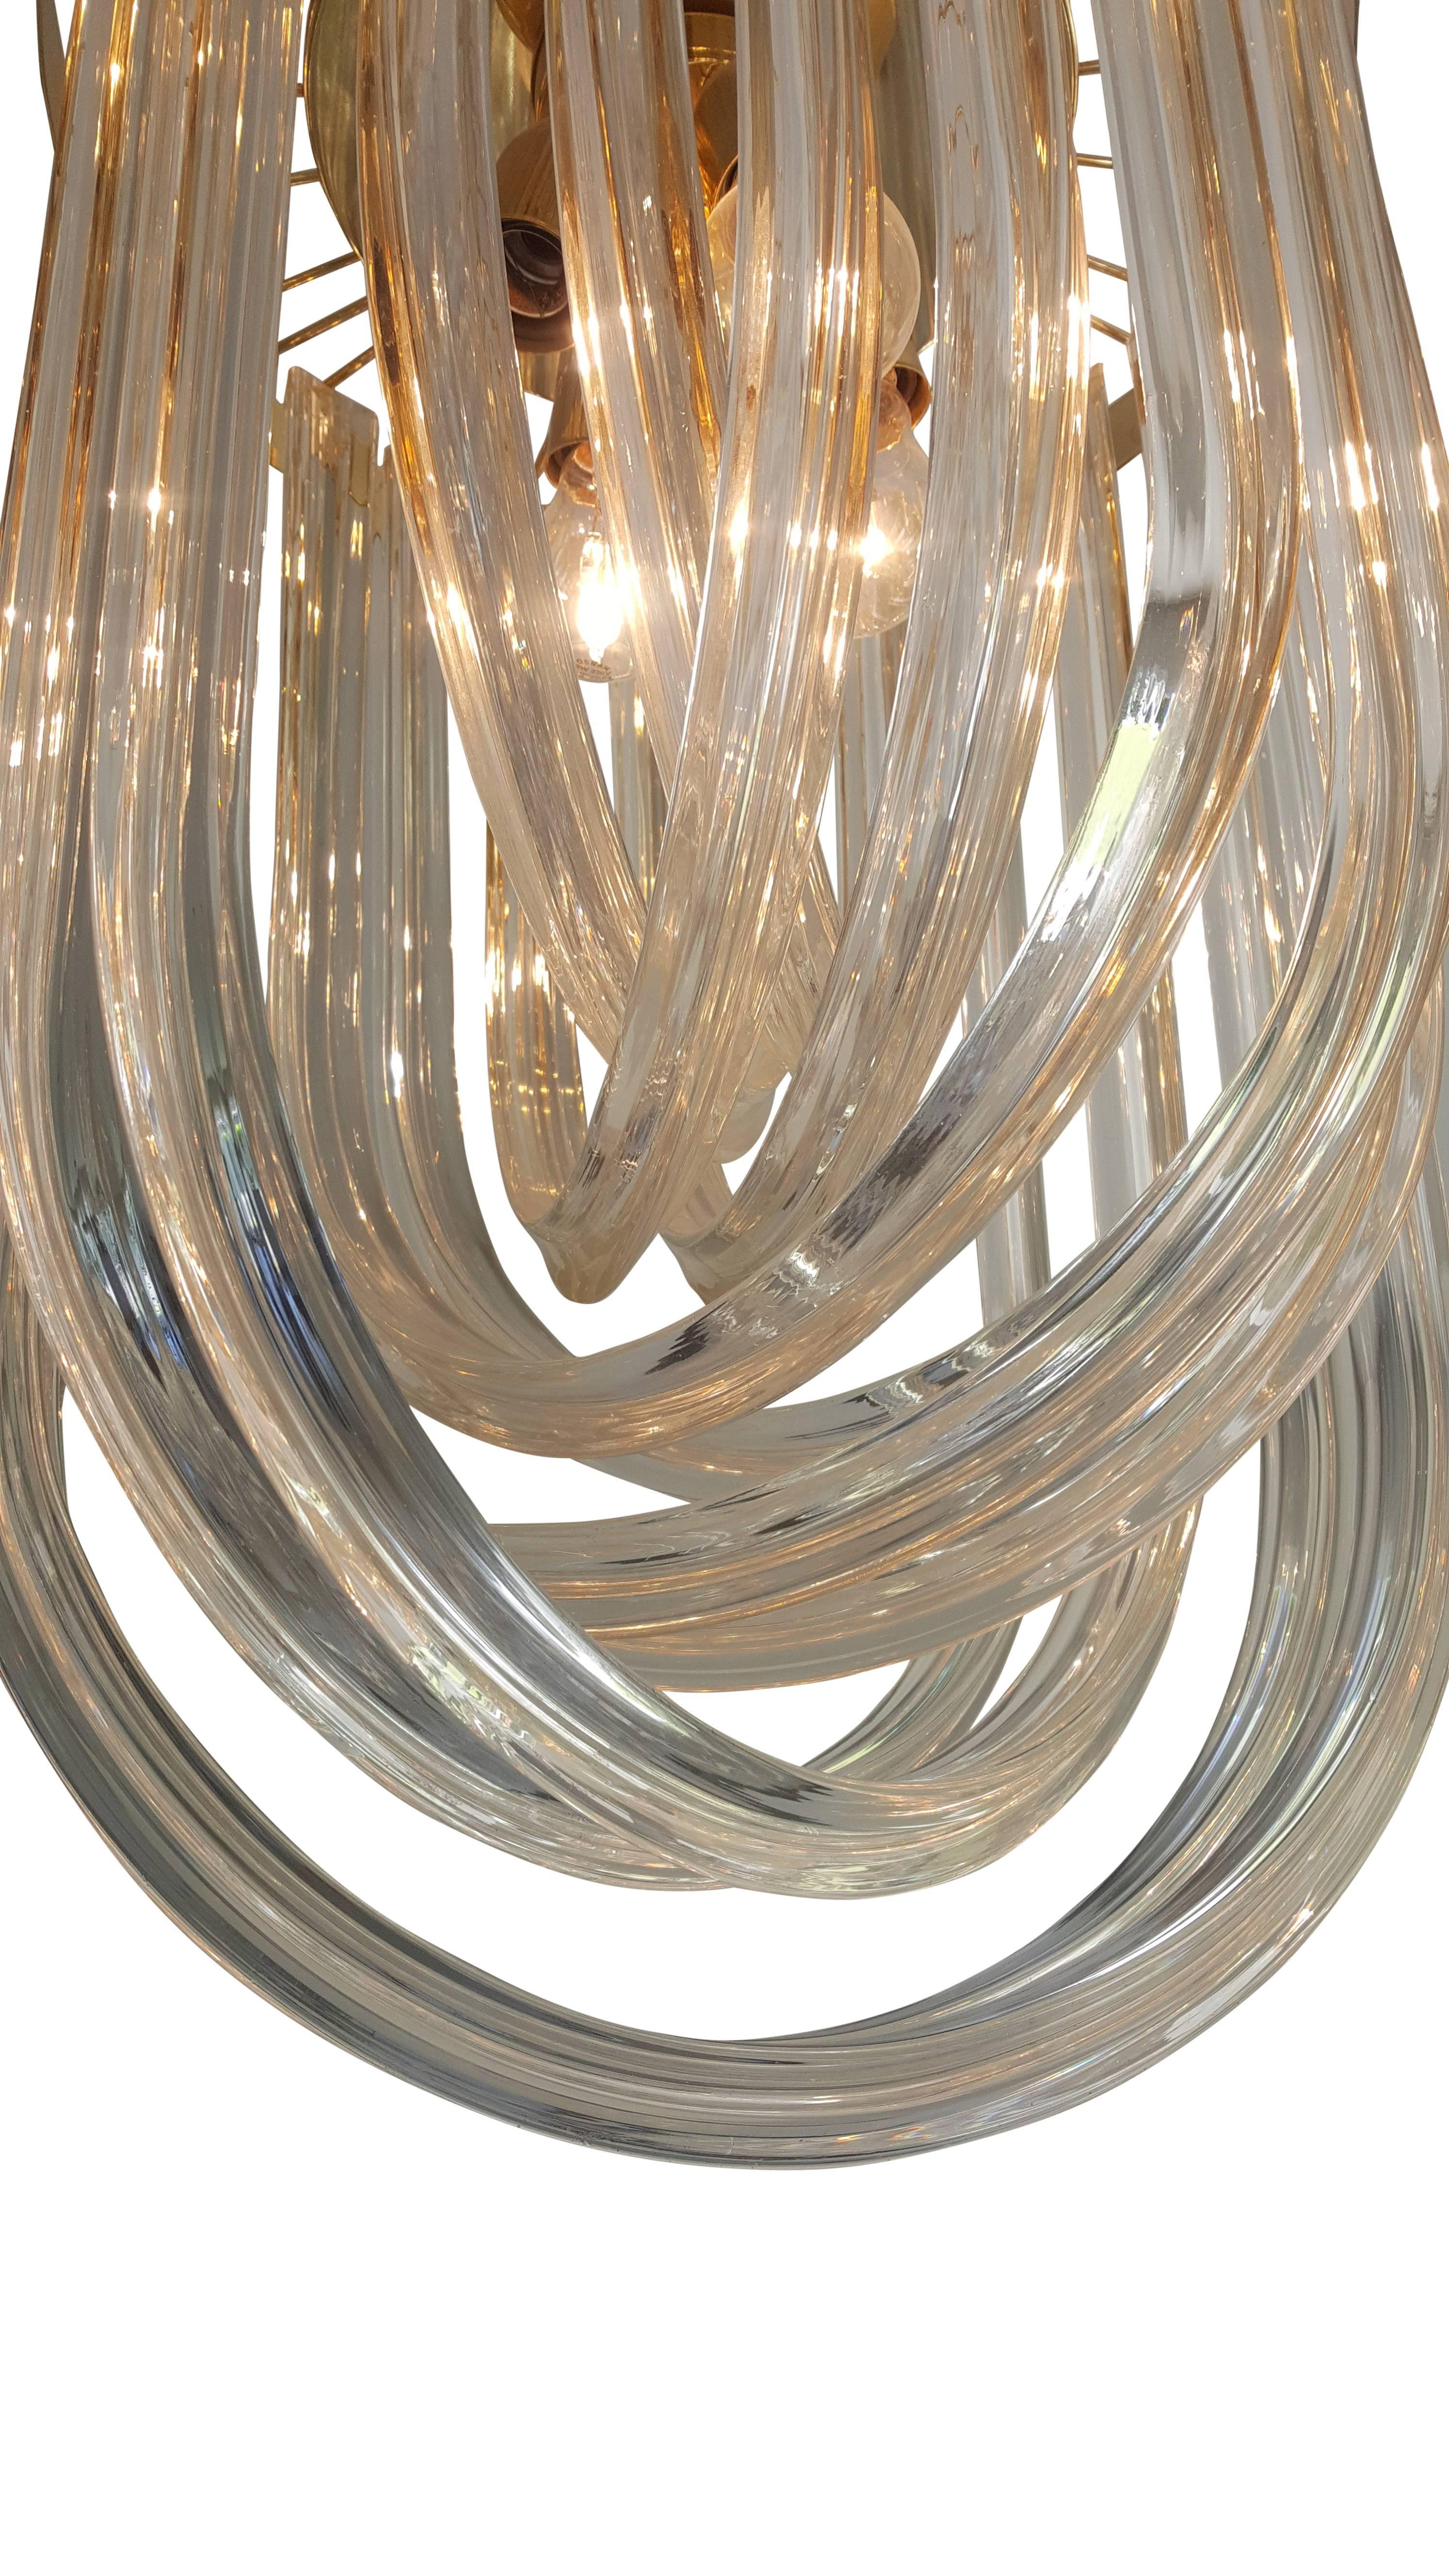 Murano chandelier 
The Murano features a series of long sculptural drops which let reflected light sparkle from the internal light fittings. The chandelier has a circular frame.
 